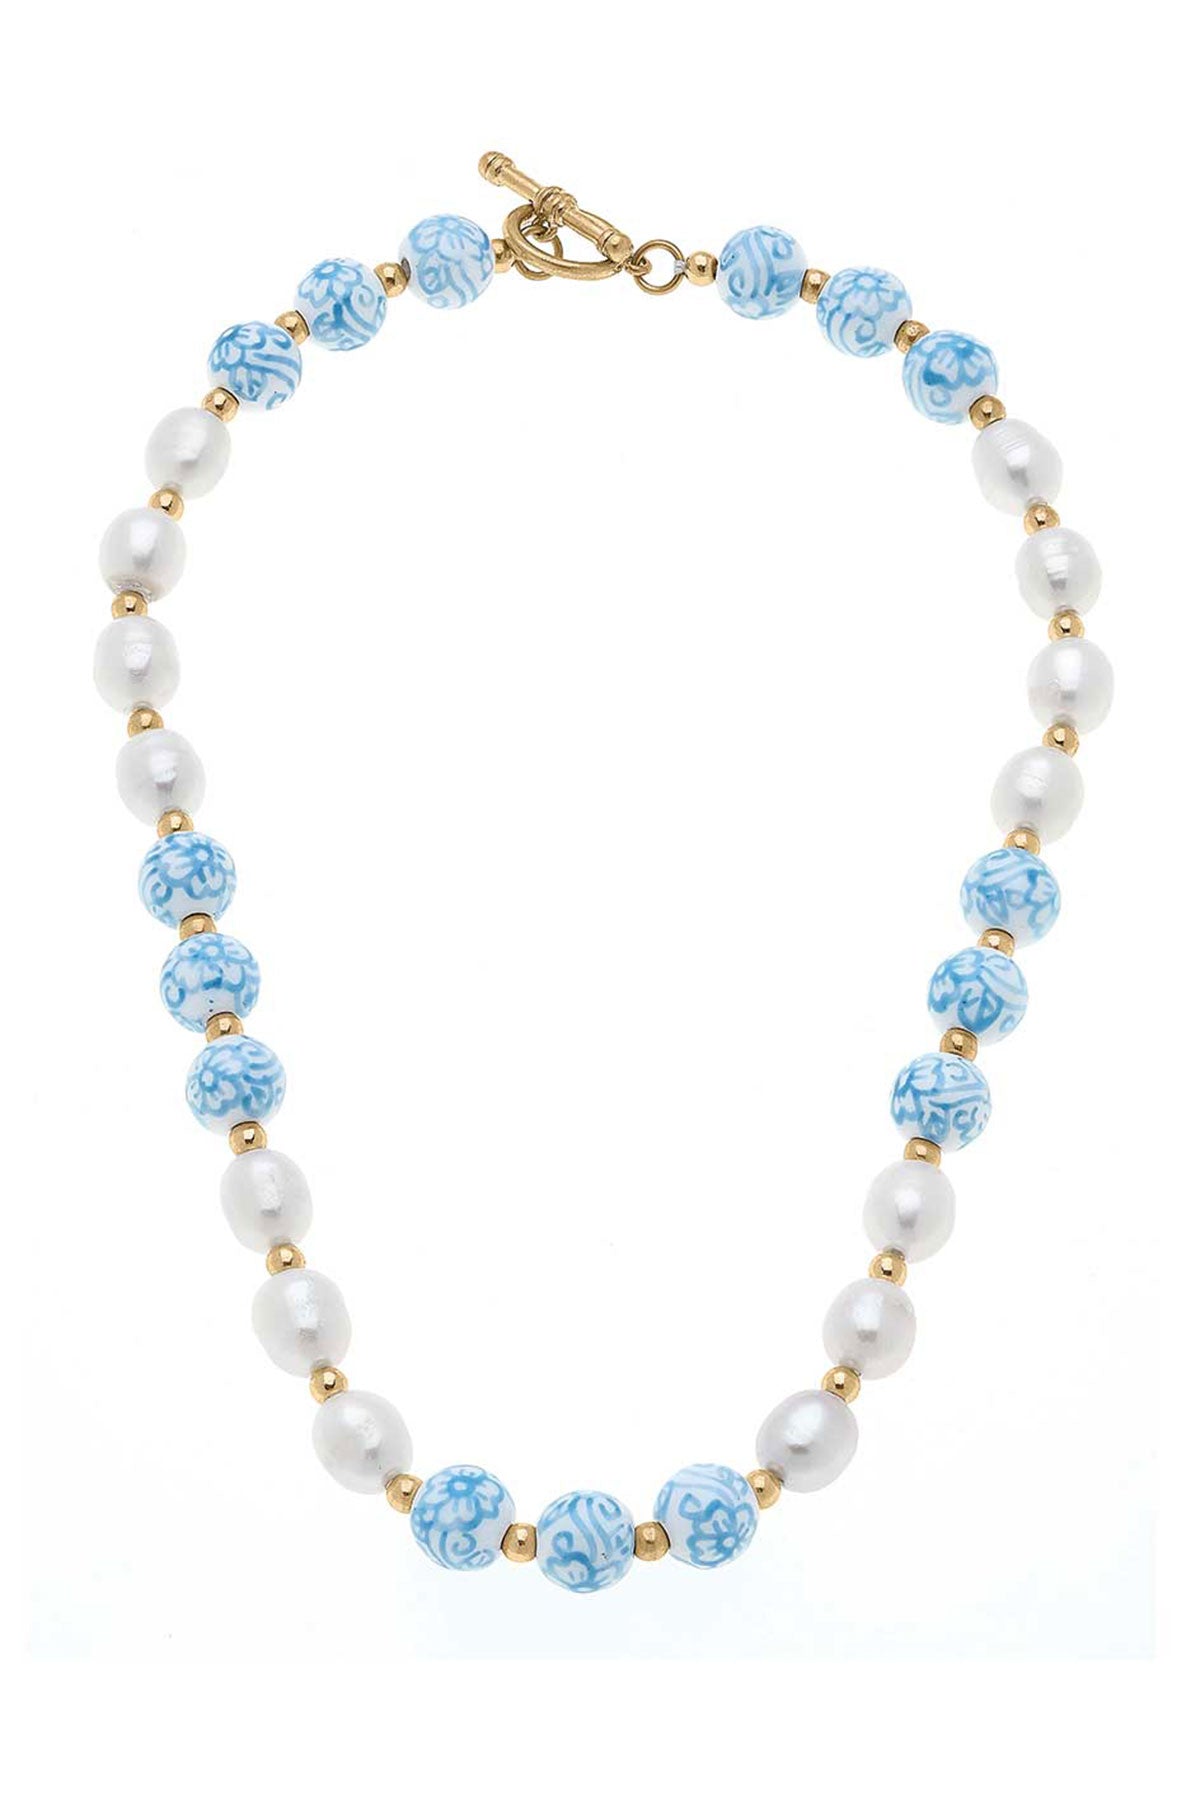 Blythe Porcelain & Pearl Beaded T-Bar Necklace in Wedgwood Blue